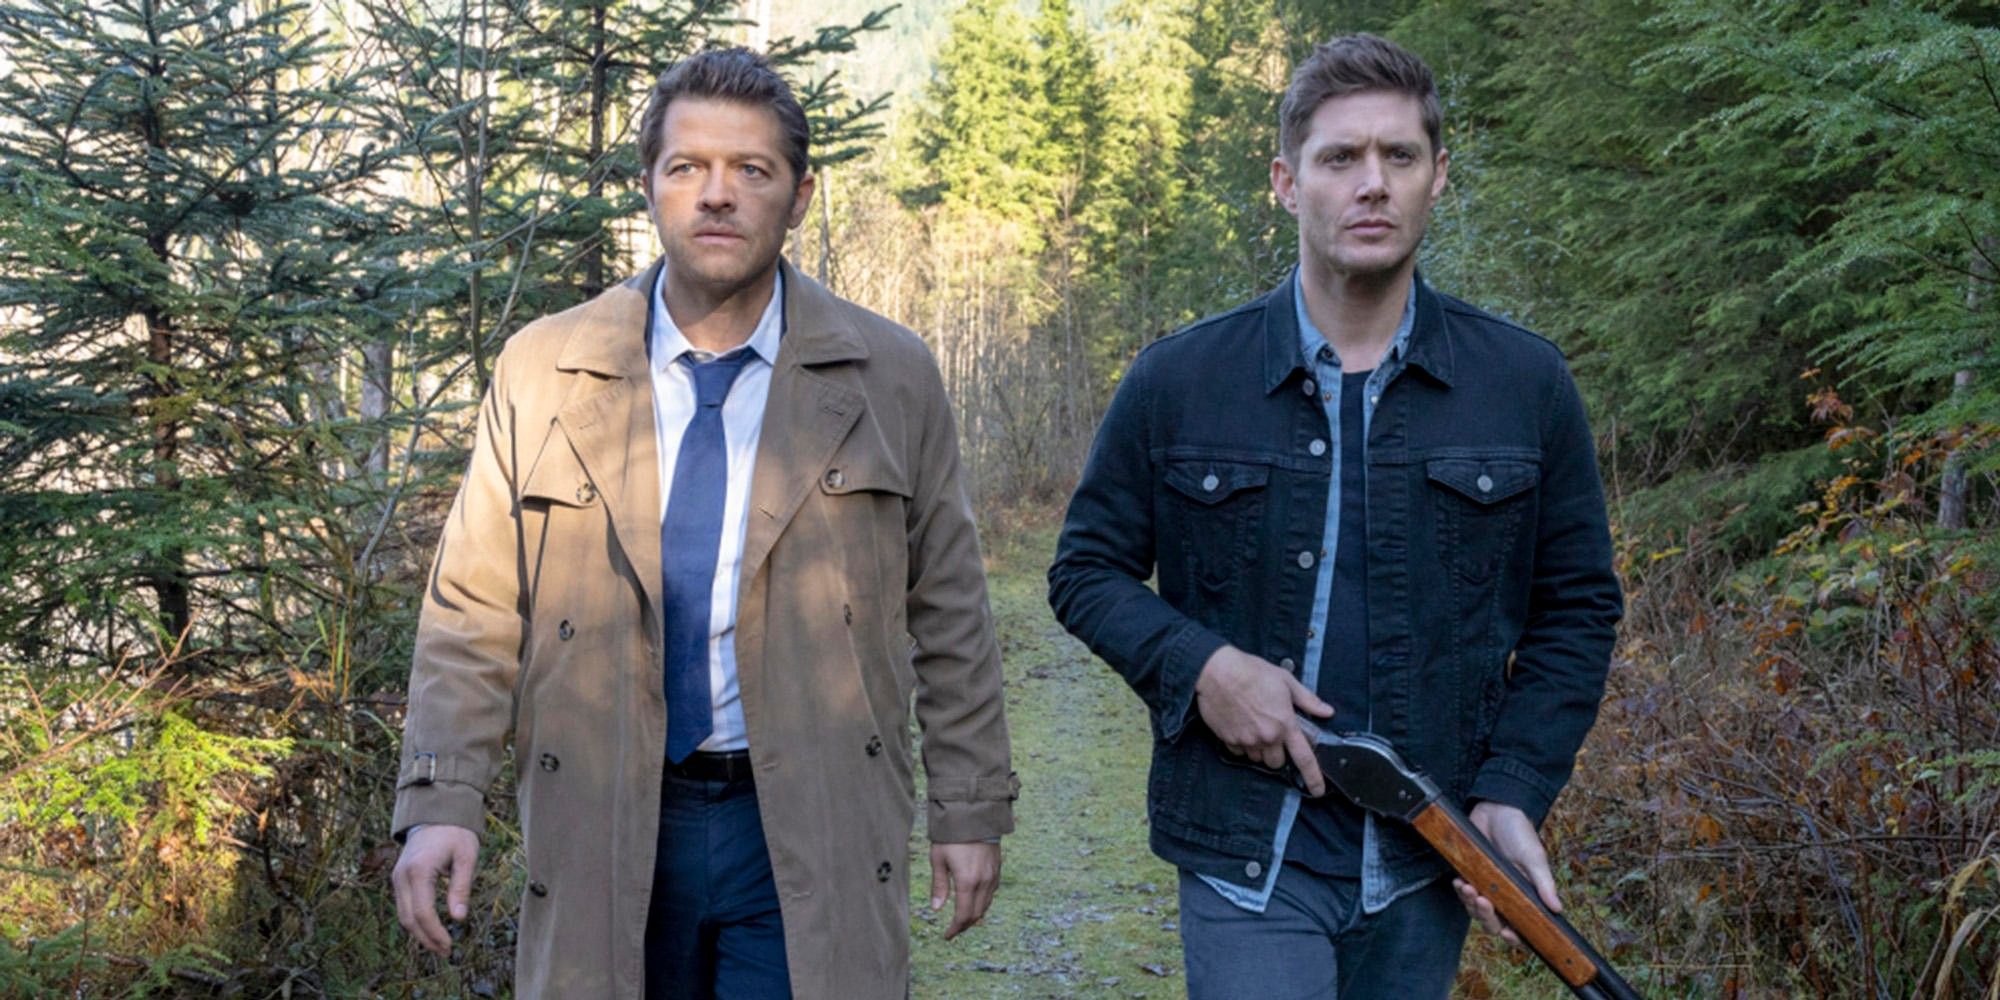 Misha Collins as Castiel and Jensen Ackles as Dean Winchester in Supernatural